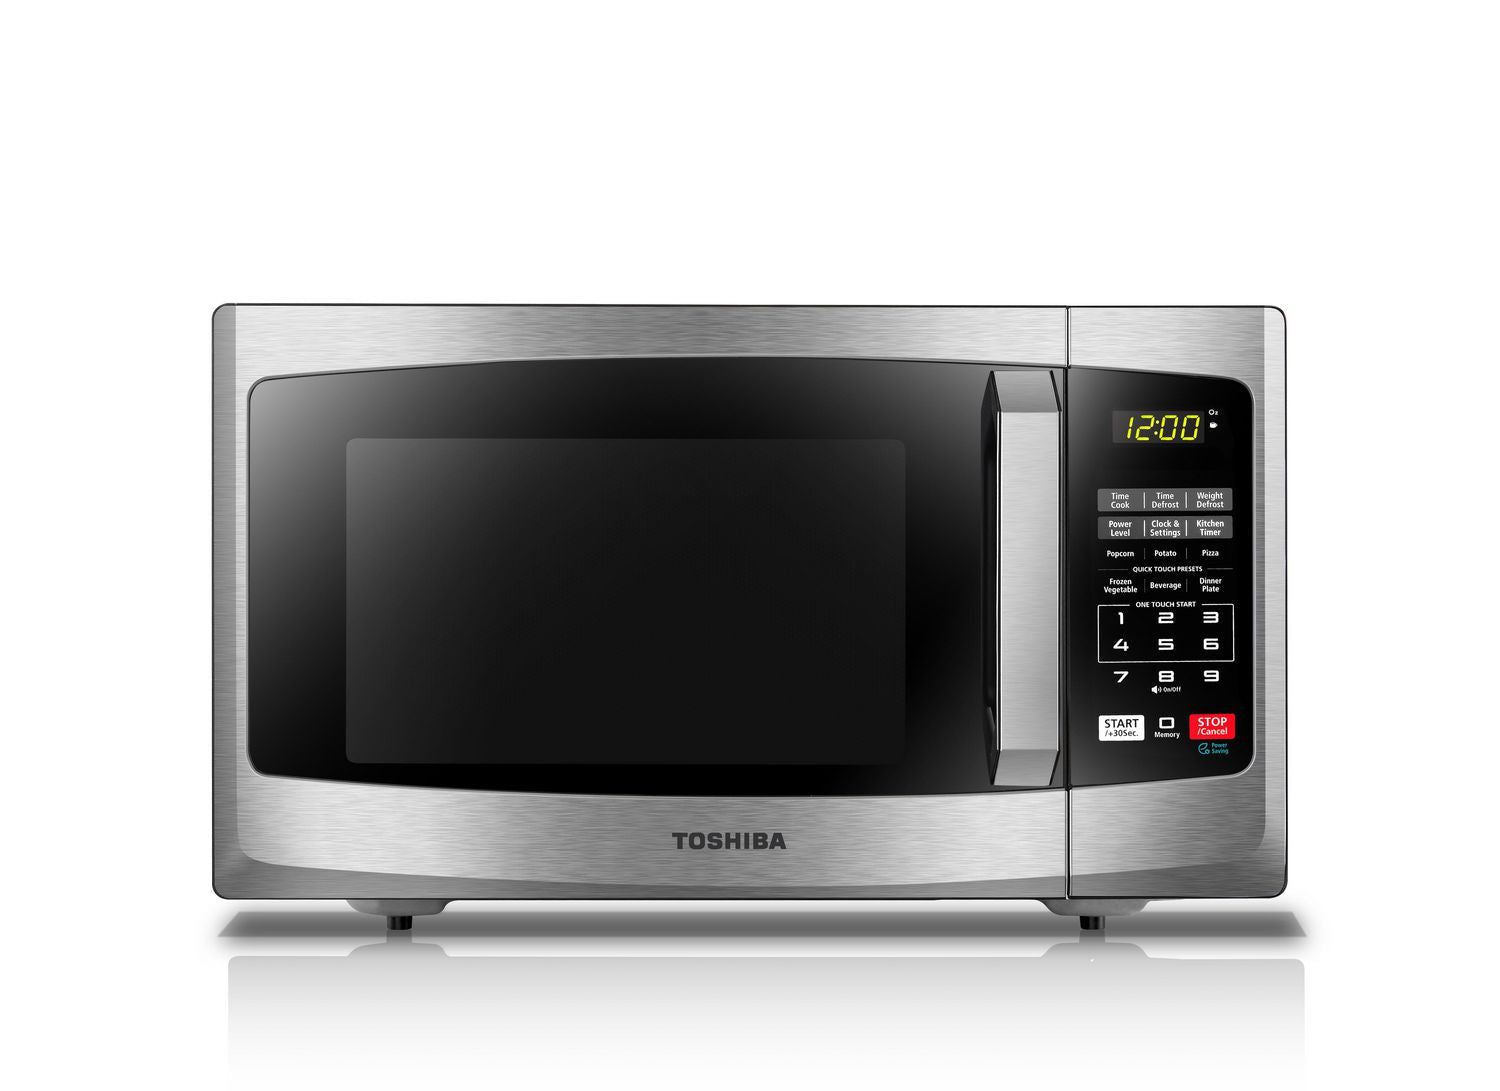 TOSHIBA EM25P (SS) 0.9cu. ft. Countertop Stainless Steel Microwave